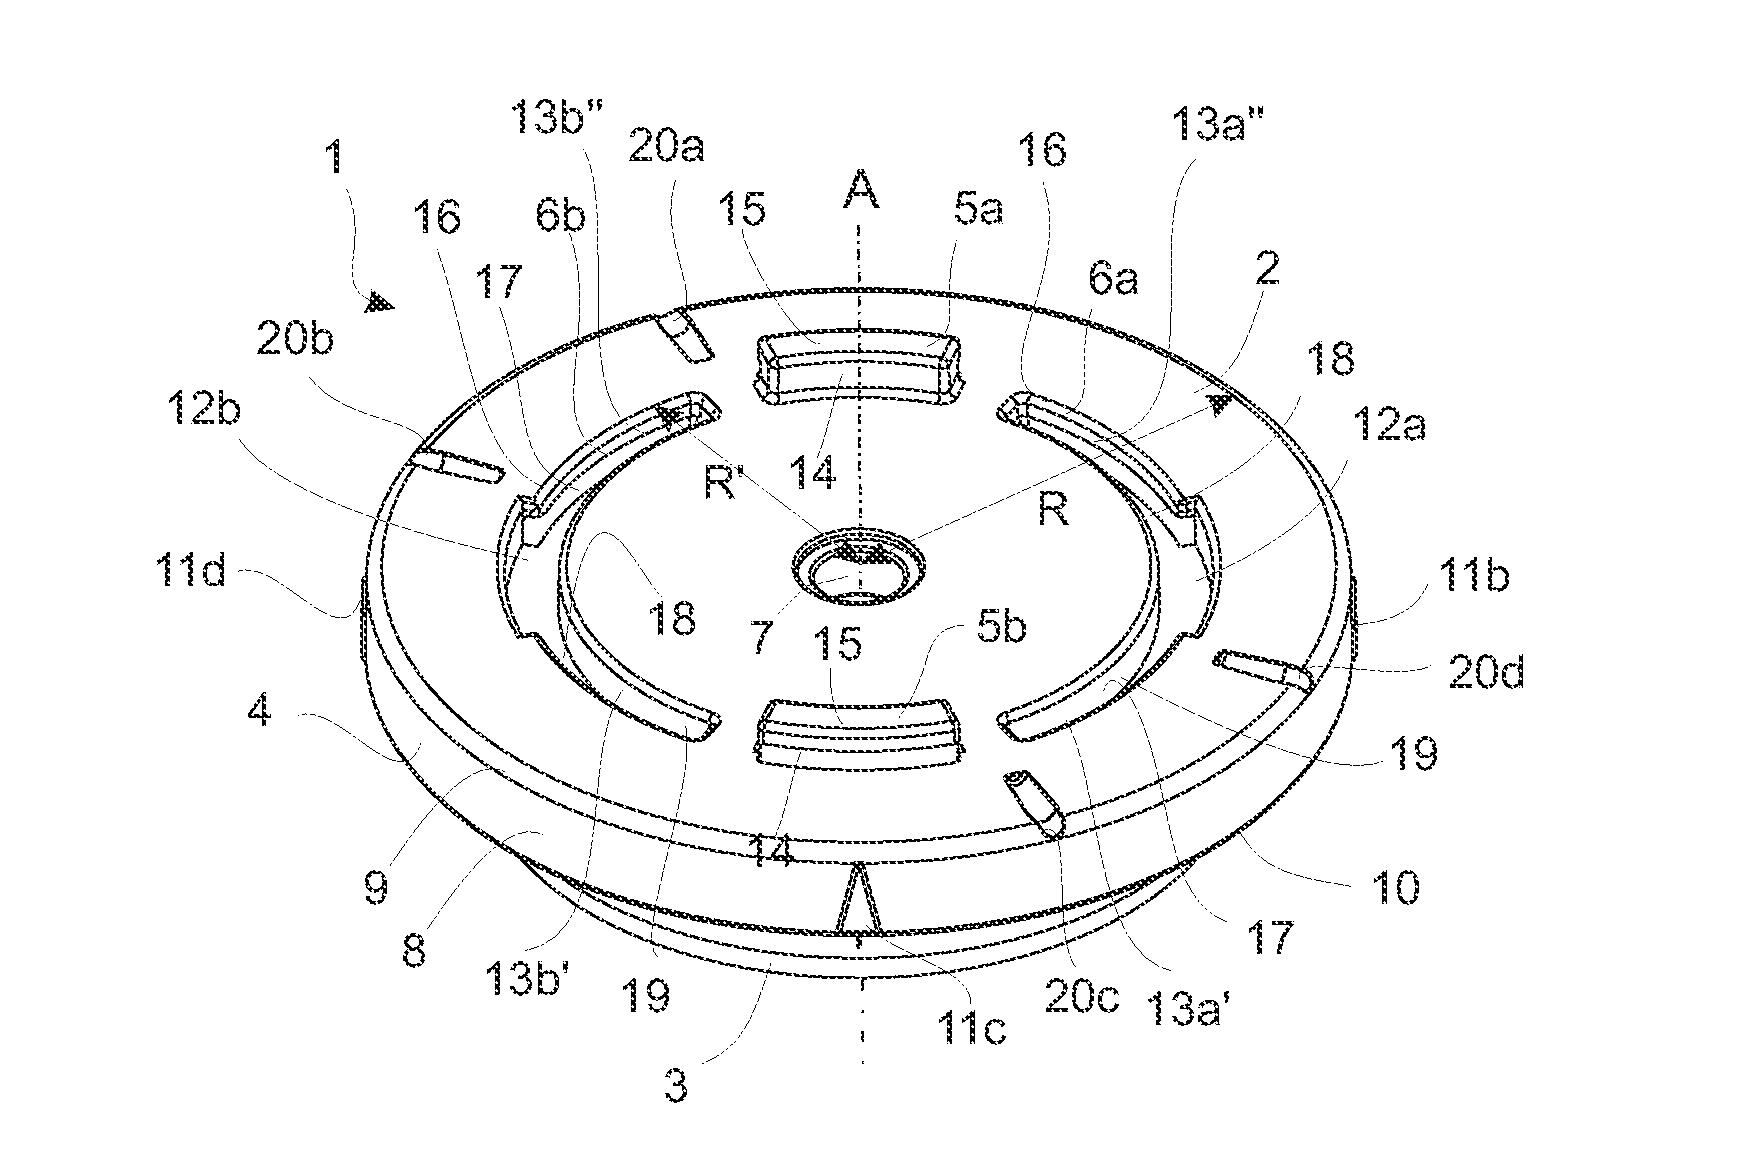 Modular climbing tree and method of assembly